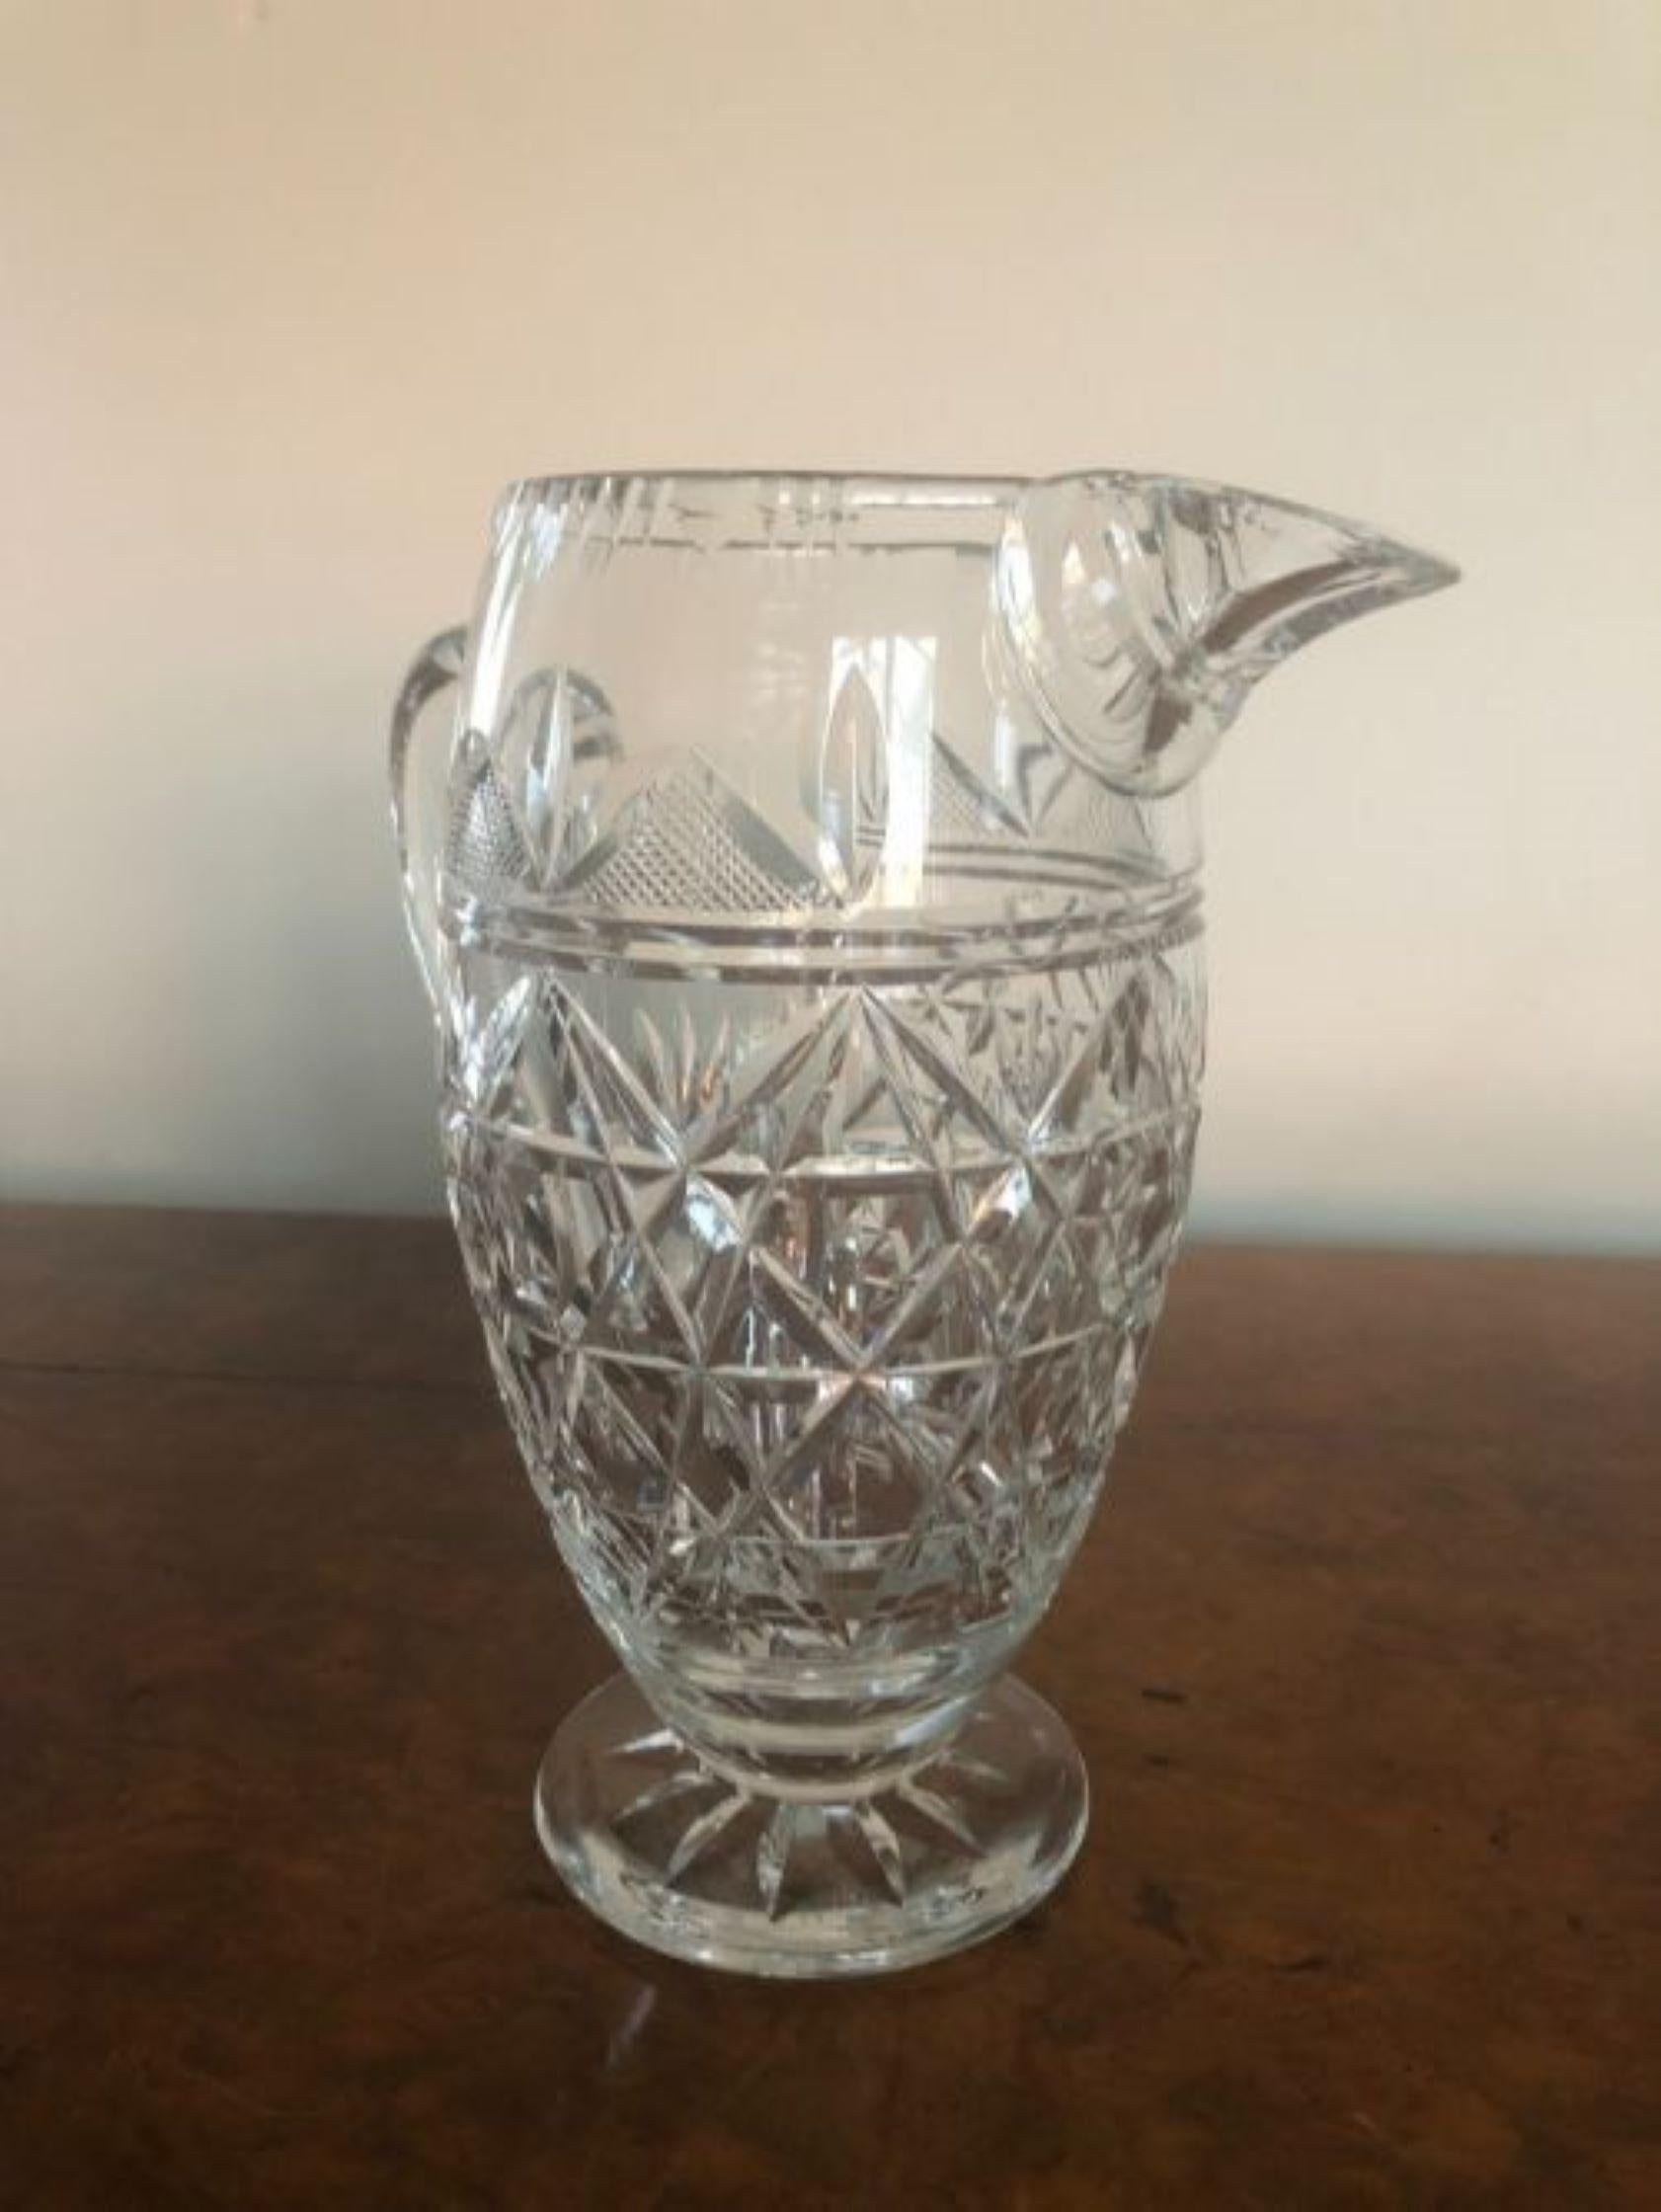 Superb quality antique cut glass water jug. Superb quality cut glass water jug with a shaped handle, raised on a round cut glass base